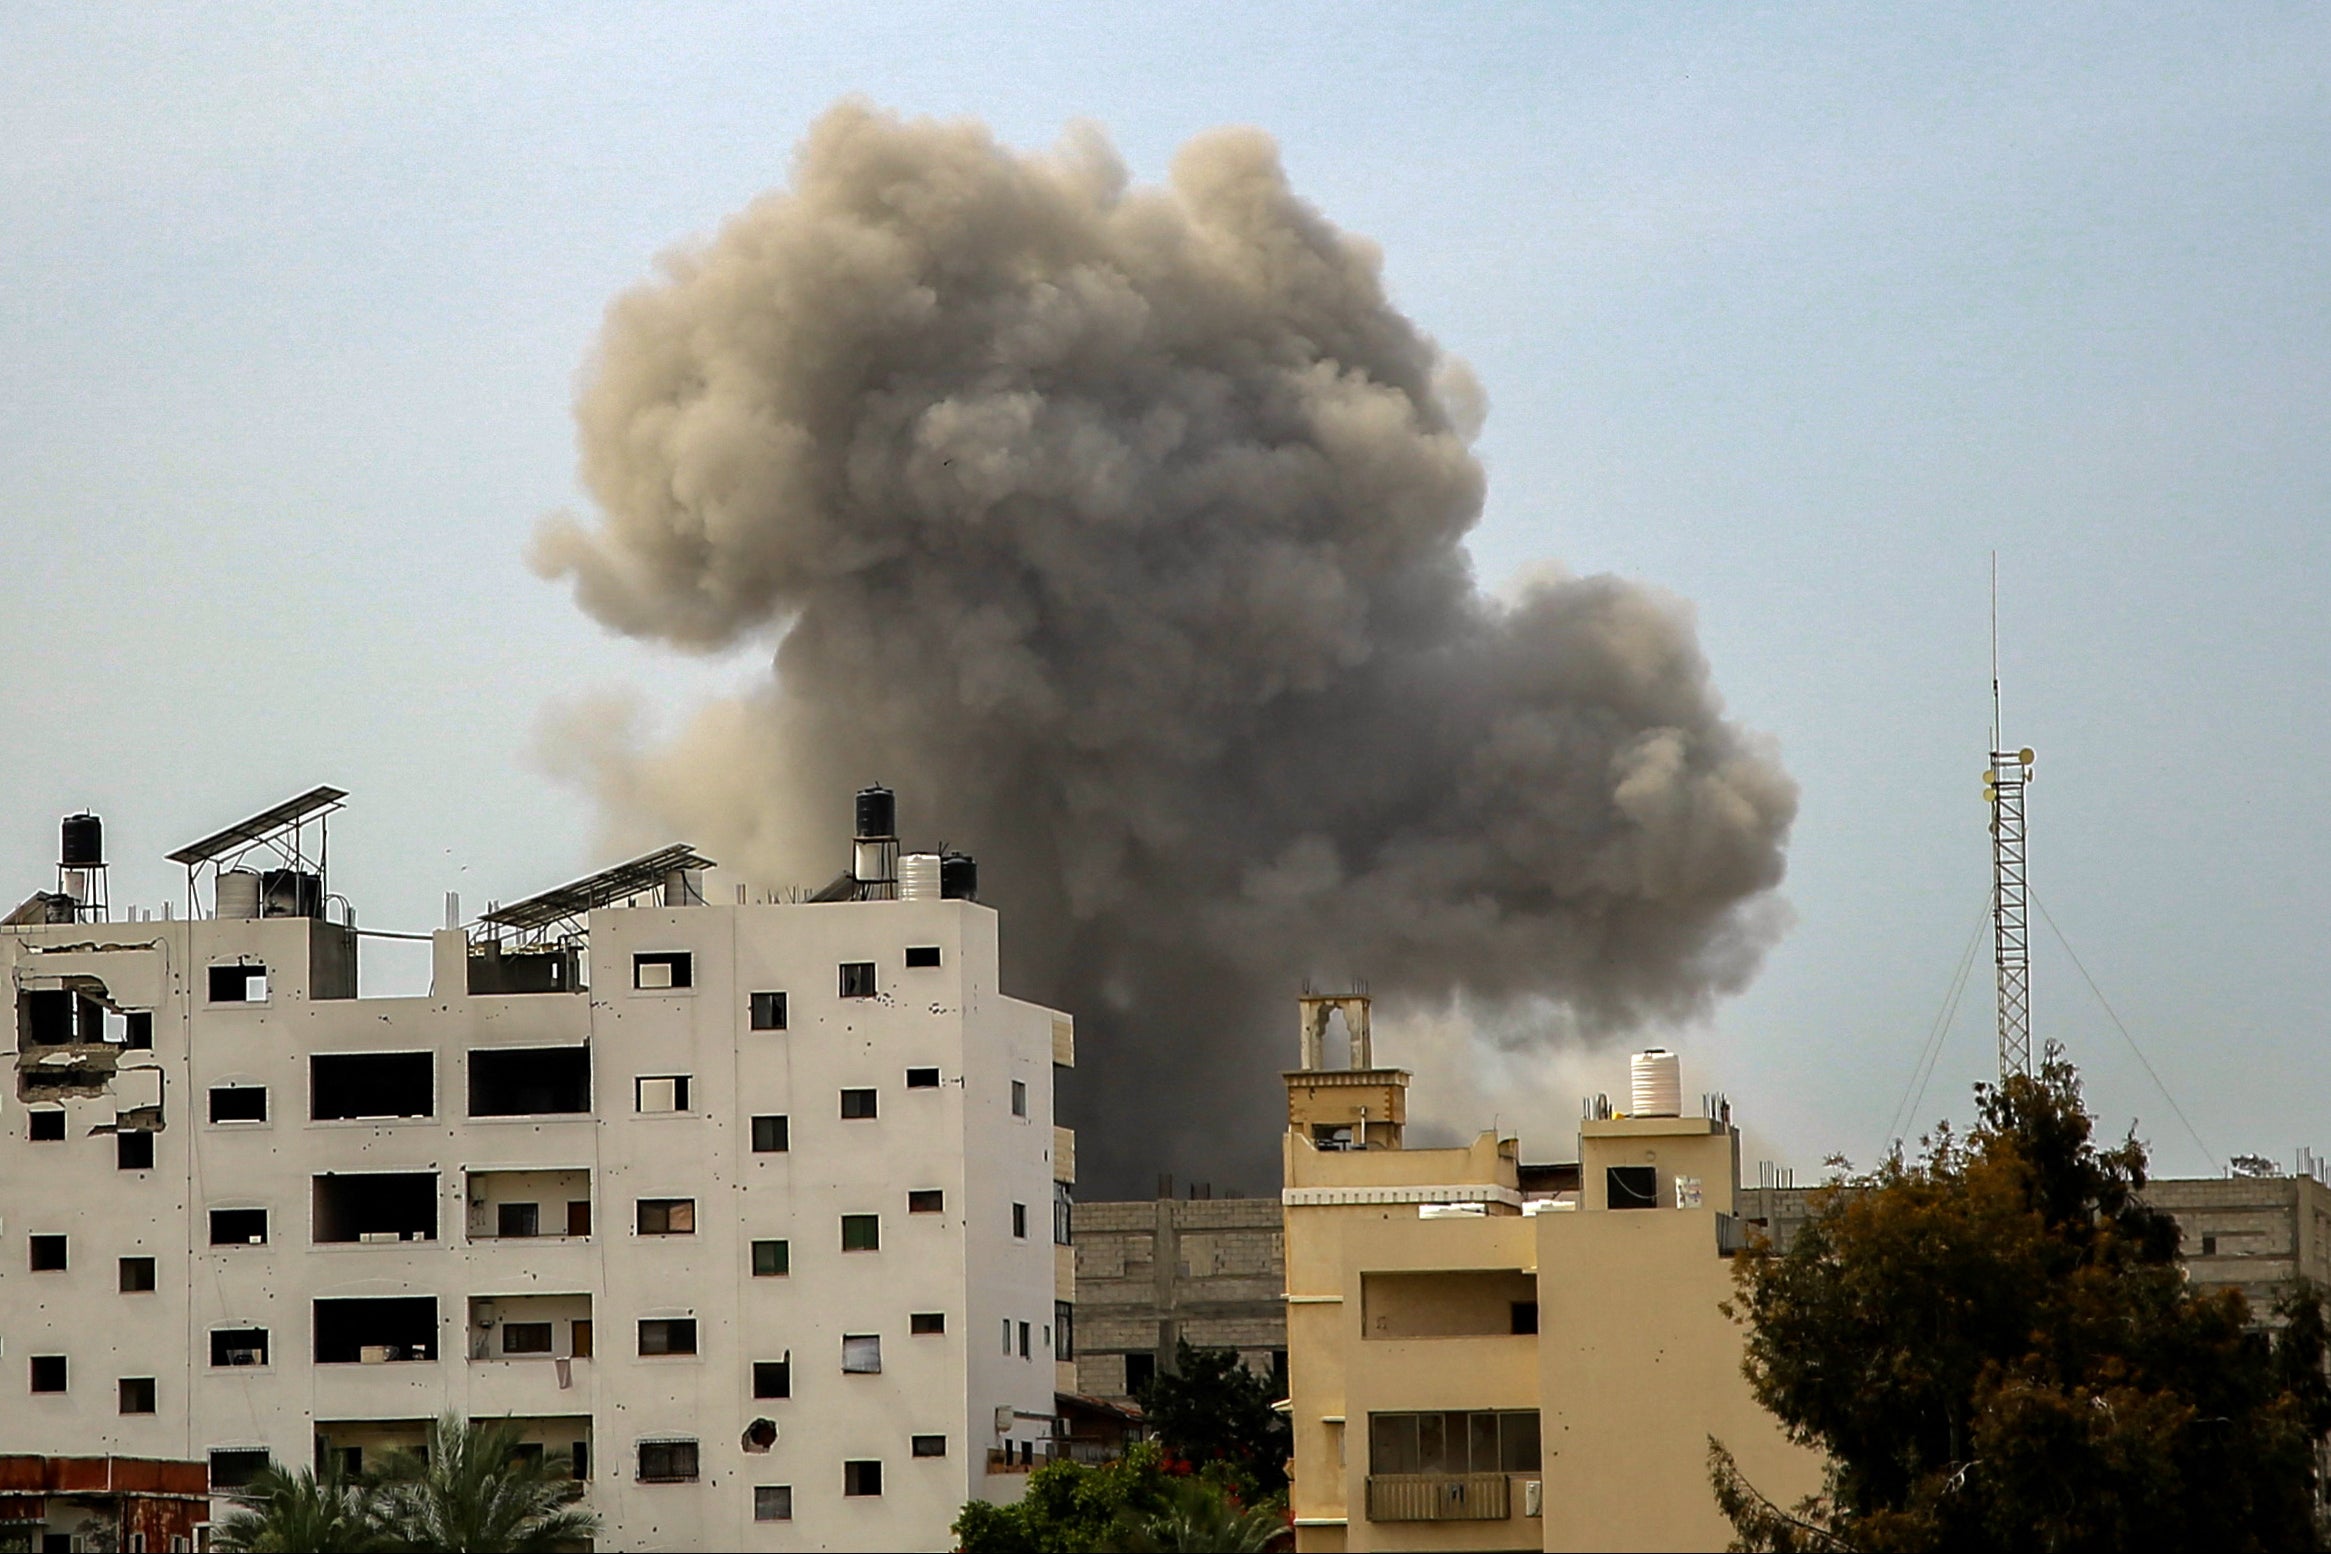 Smoke rises above buildings during an Israeli strike in the vicinity of the Al-Shifa hospital in Gaza City